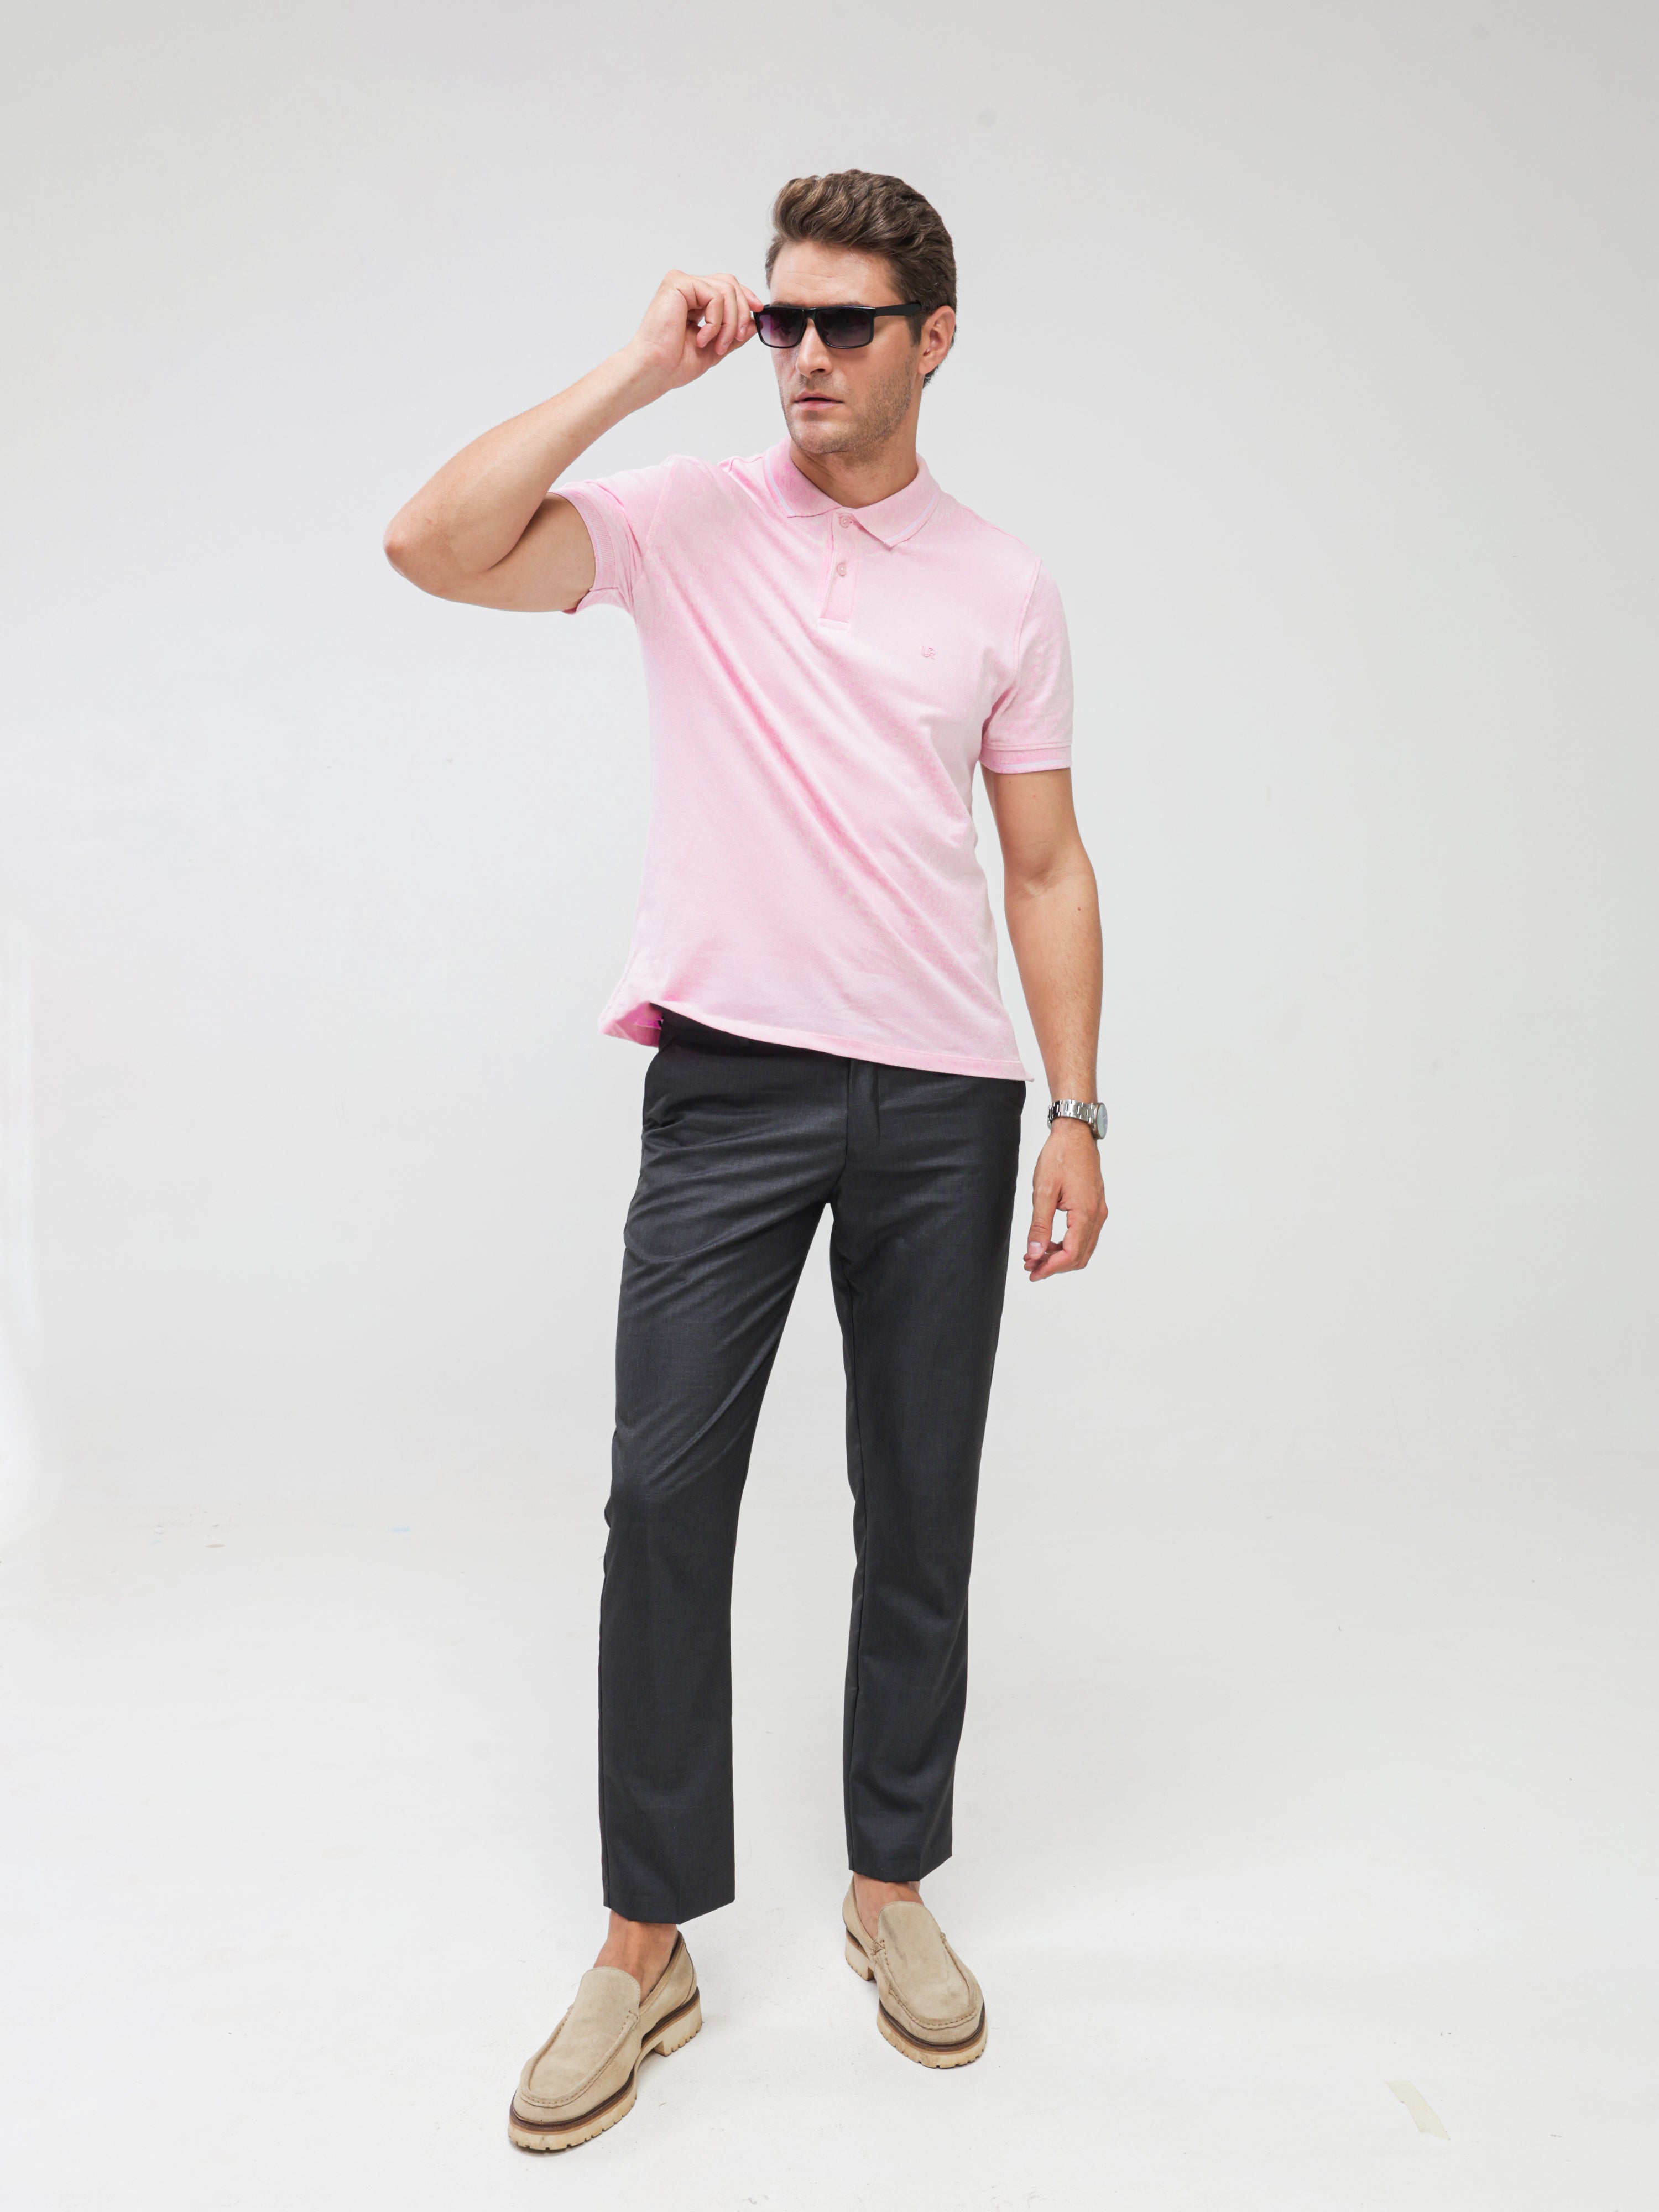 Man wearing pink Turms Polo T-shirt, tailored fit, anti-stain, anti-odor, premium cotton blend, best tshirts for men, menswear, water resistant.